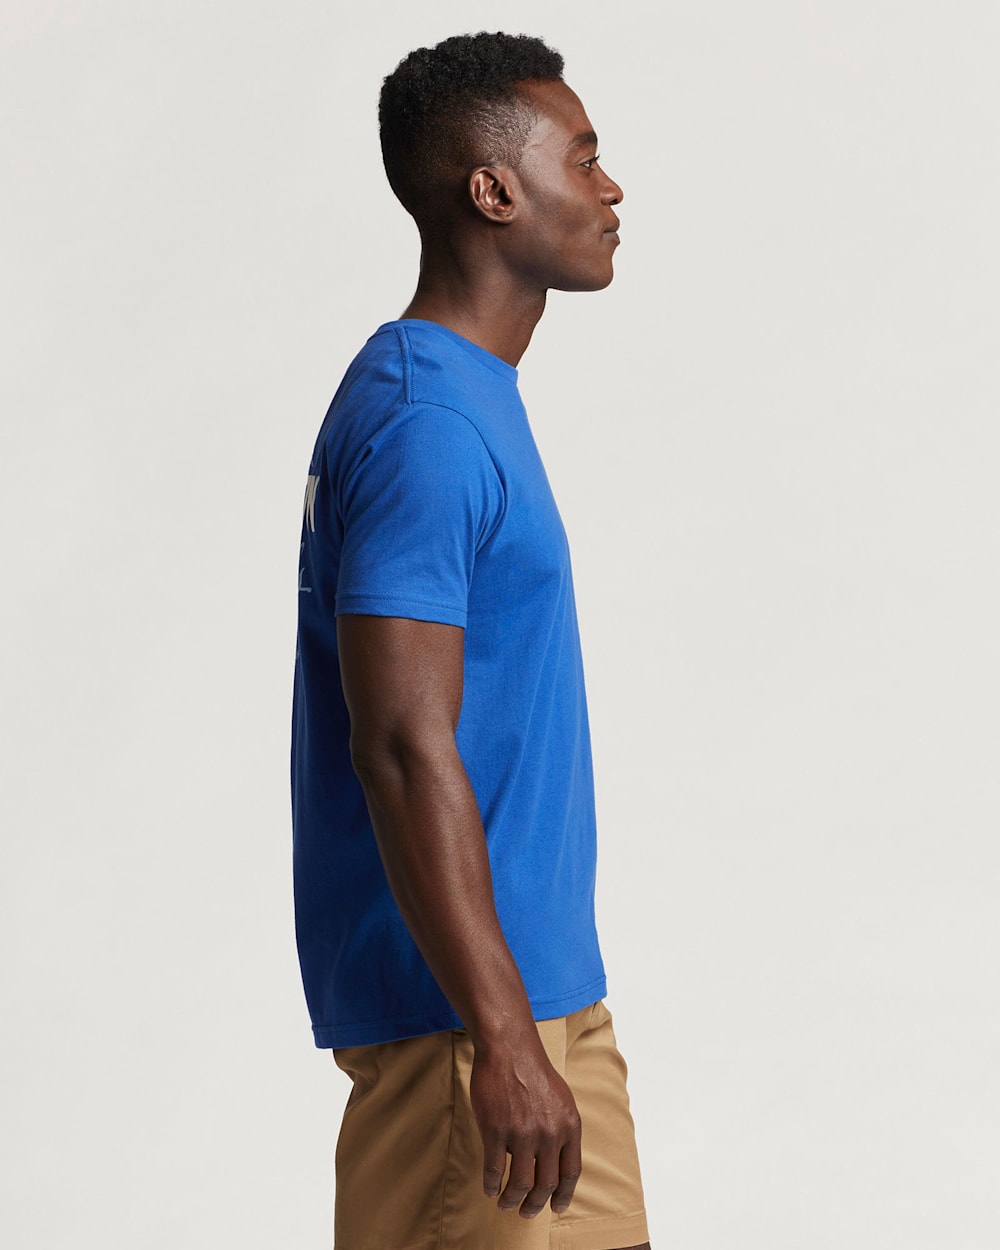 ALTERNATE VIEW OF MEN'S BASE CAMP GRAPHIC TEE IN ROYAL/WHITE image number 3